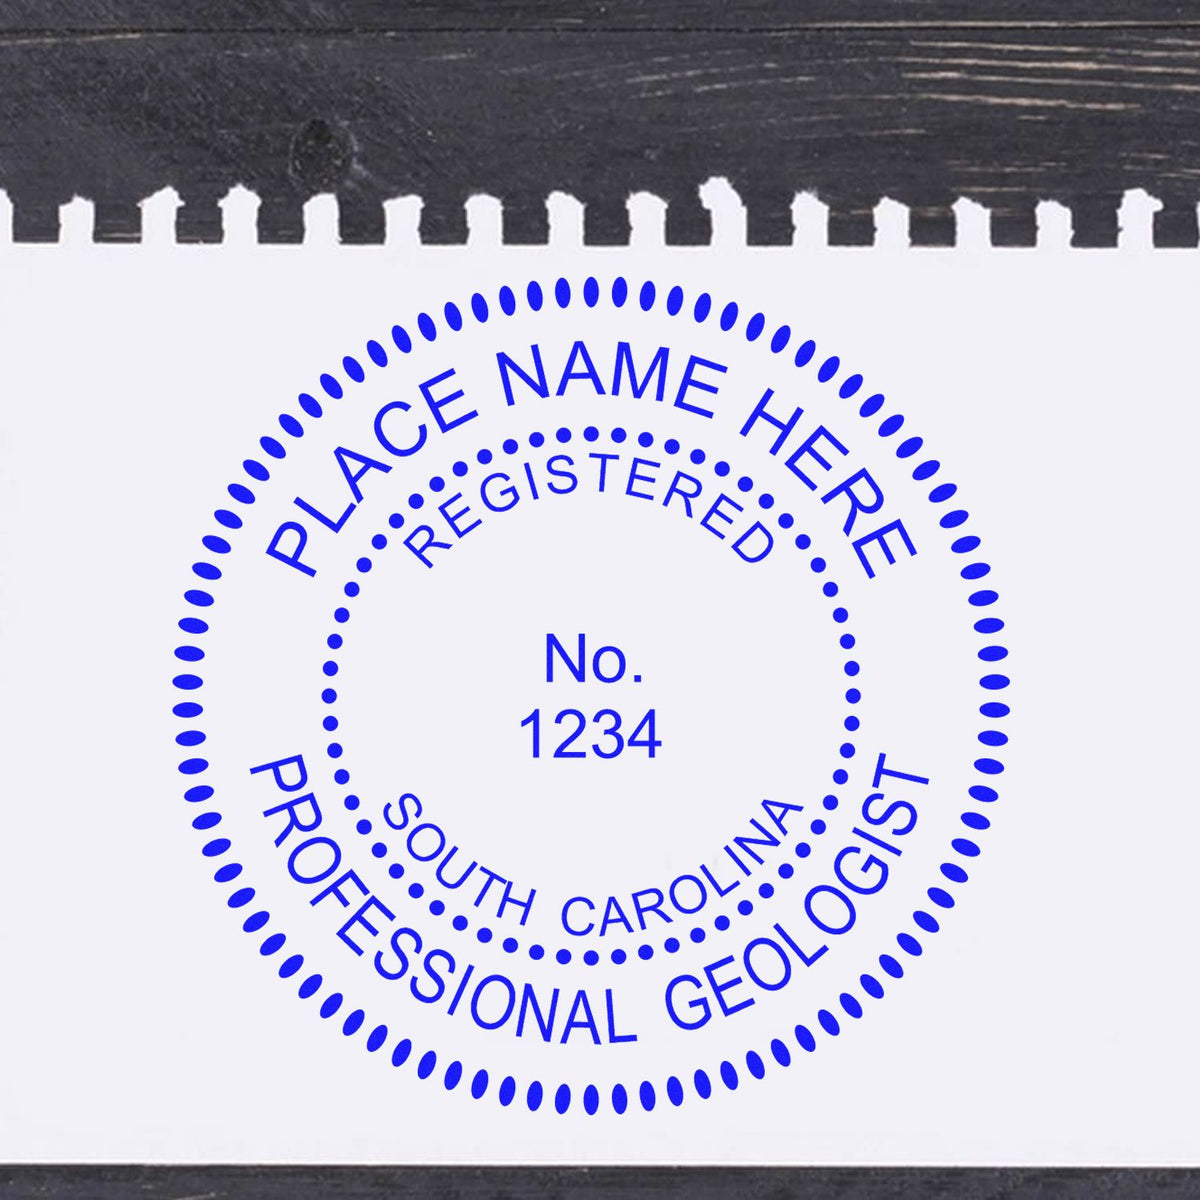 An alternative view of the Slim Pre-Inked South Carolina Professional Geologist Seal Stamp stamped on a sheet of paper showing the image in use